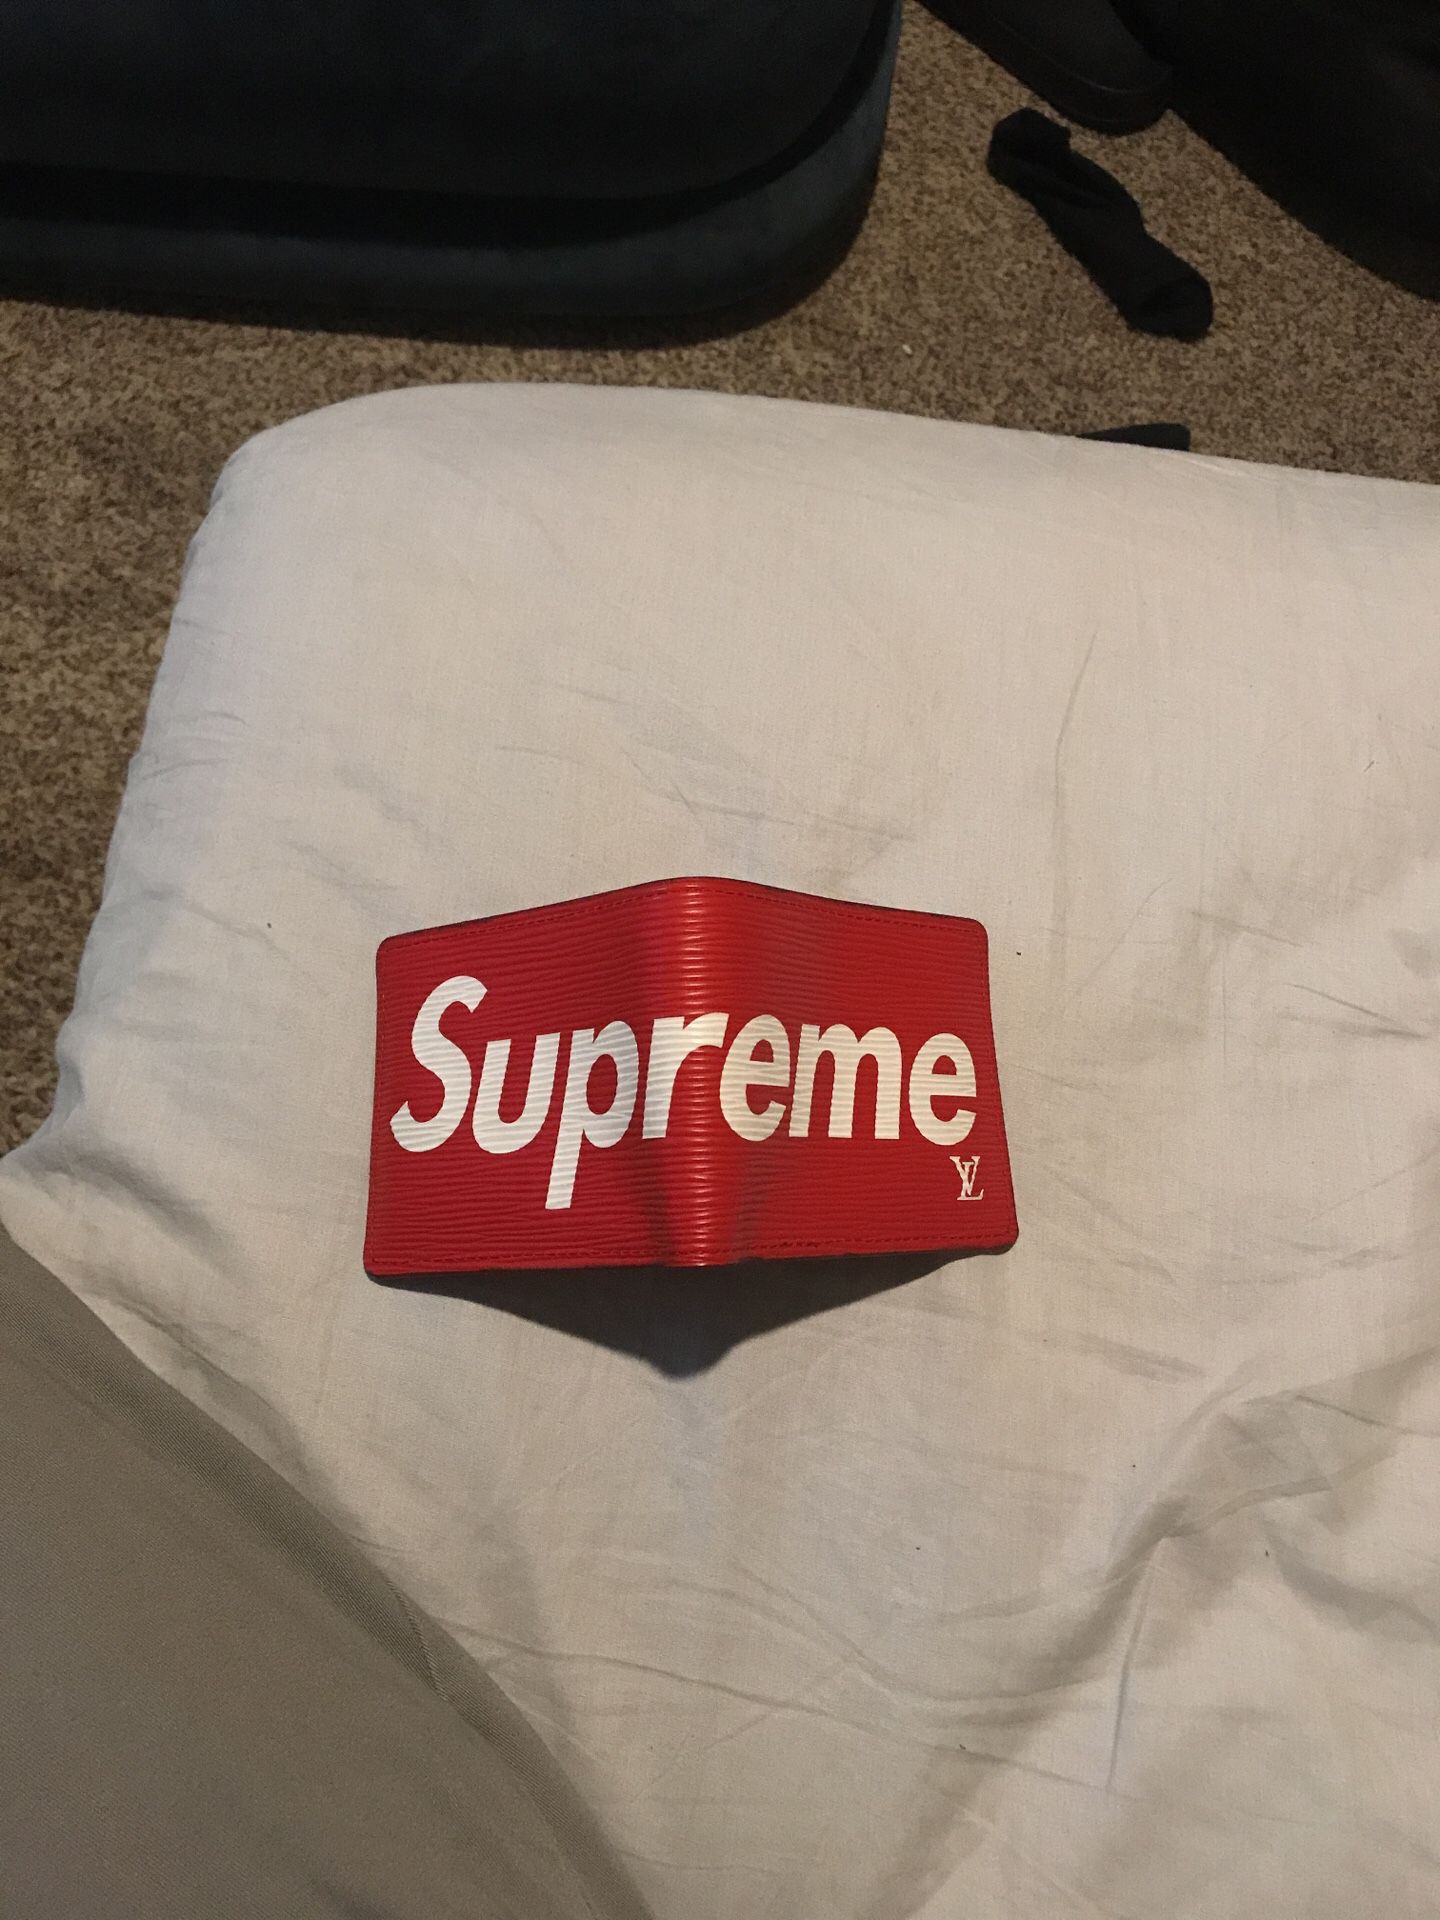 Supreme LV wallet. Trade for Xbox one